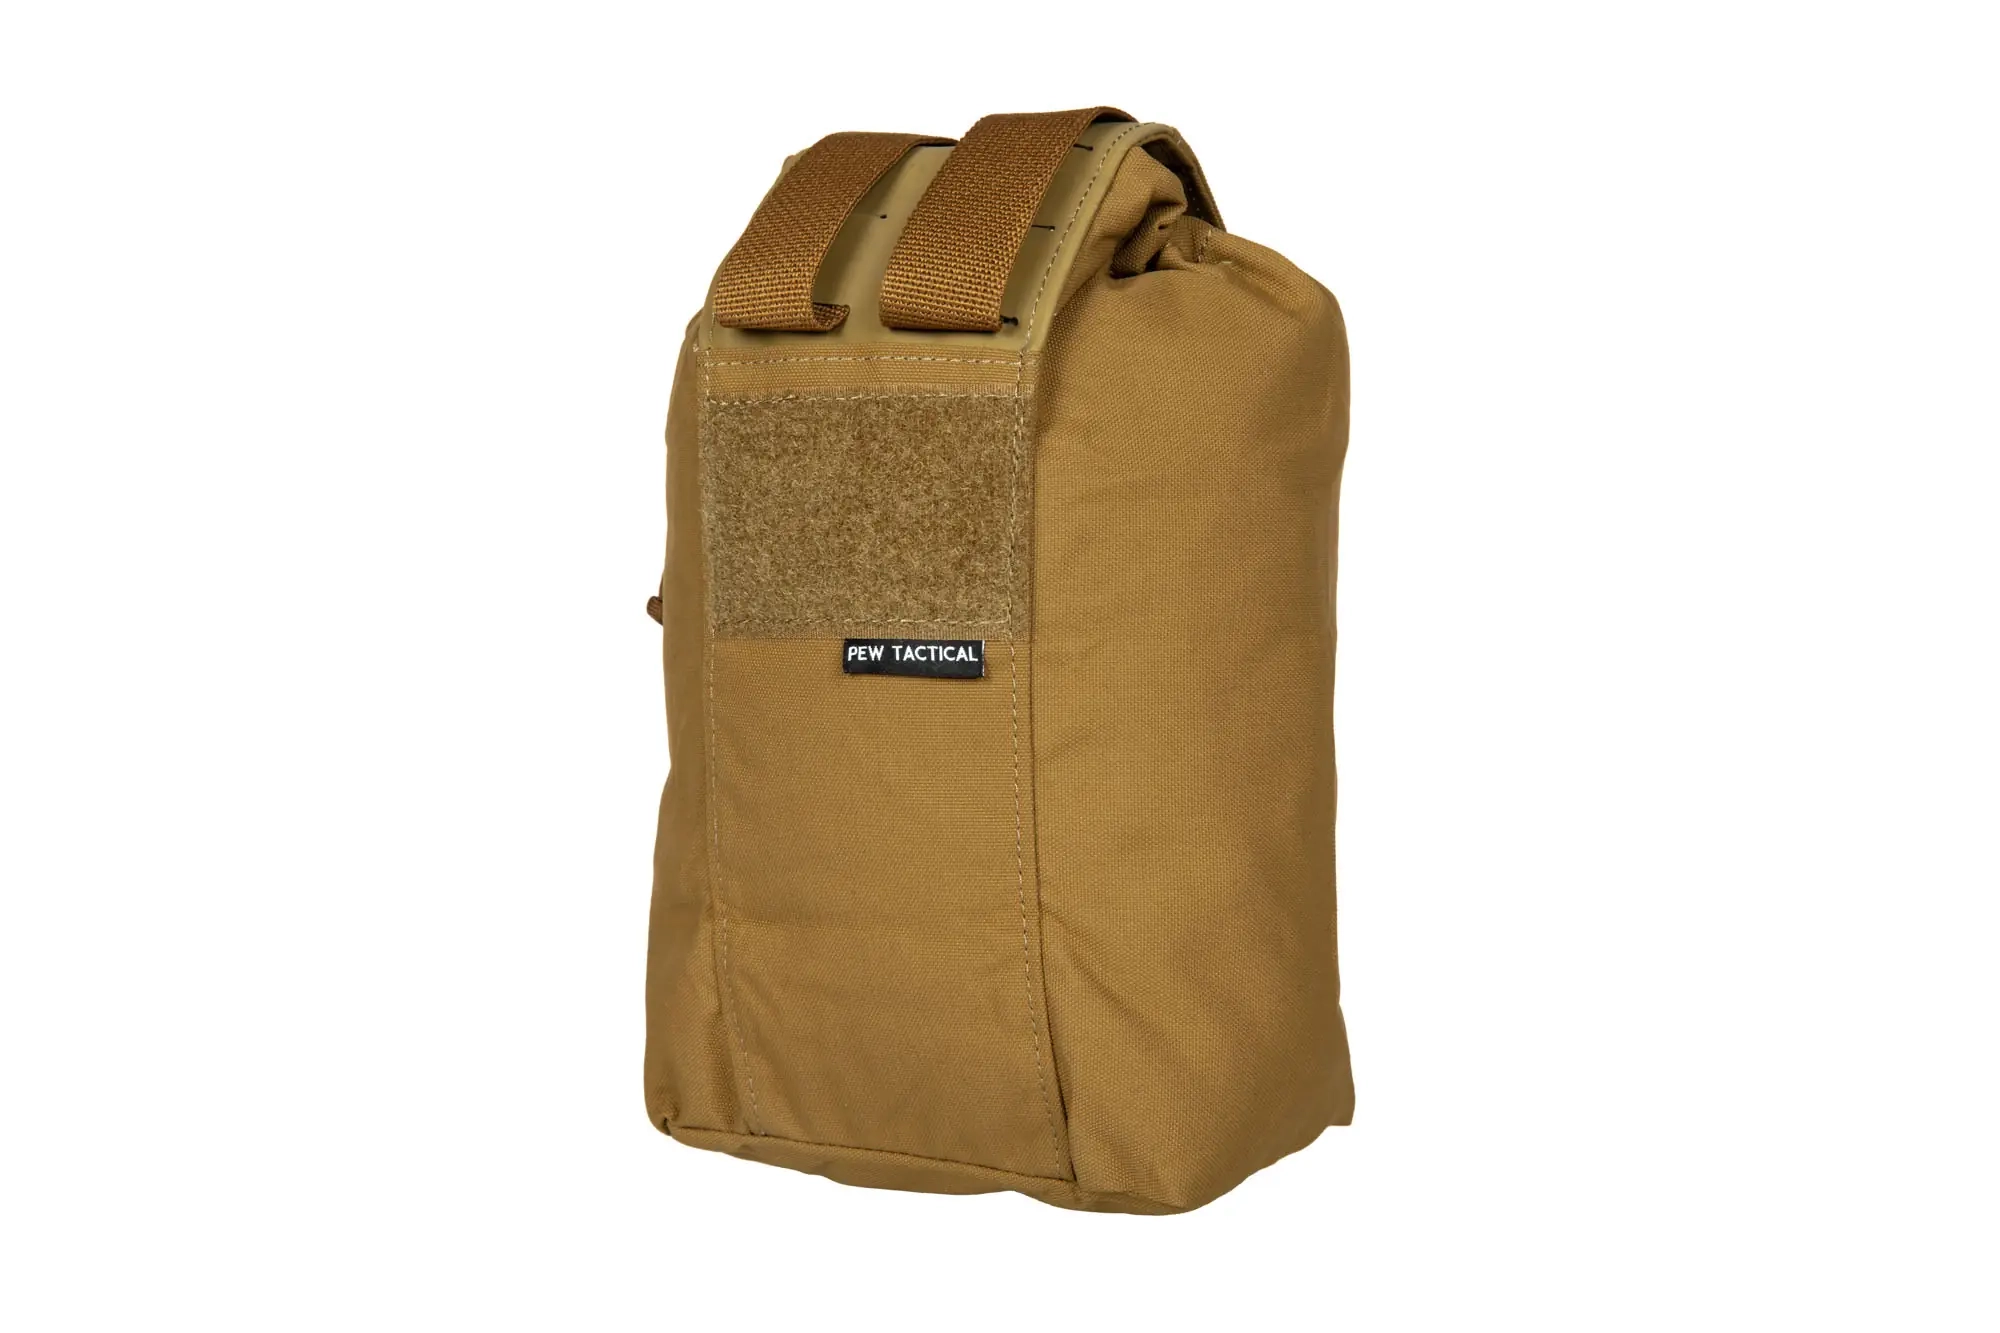 MINI Foldable Magdump pouch - Coyote Brown